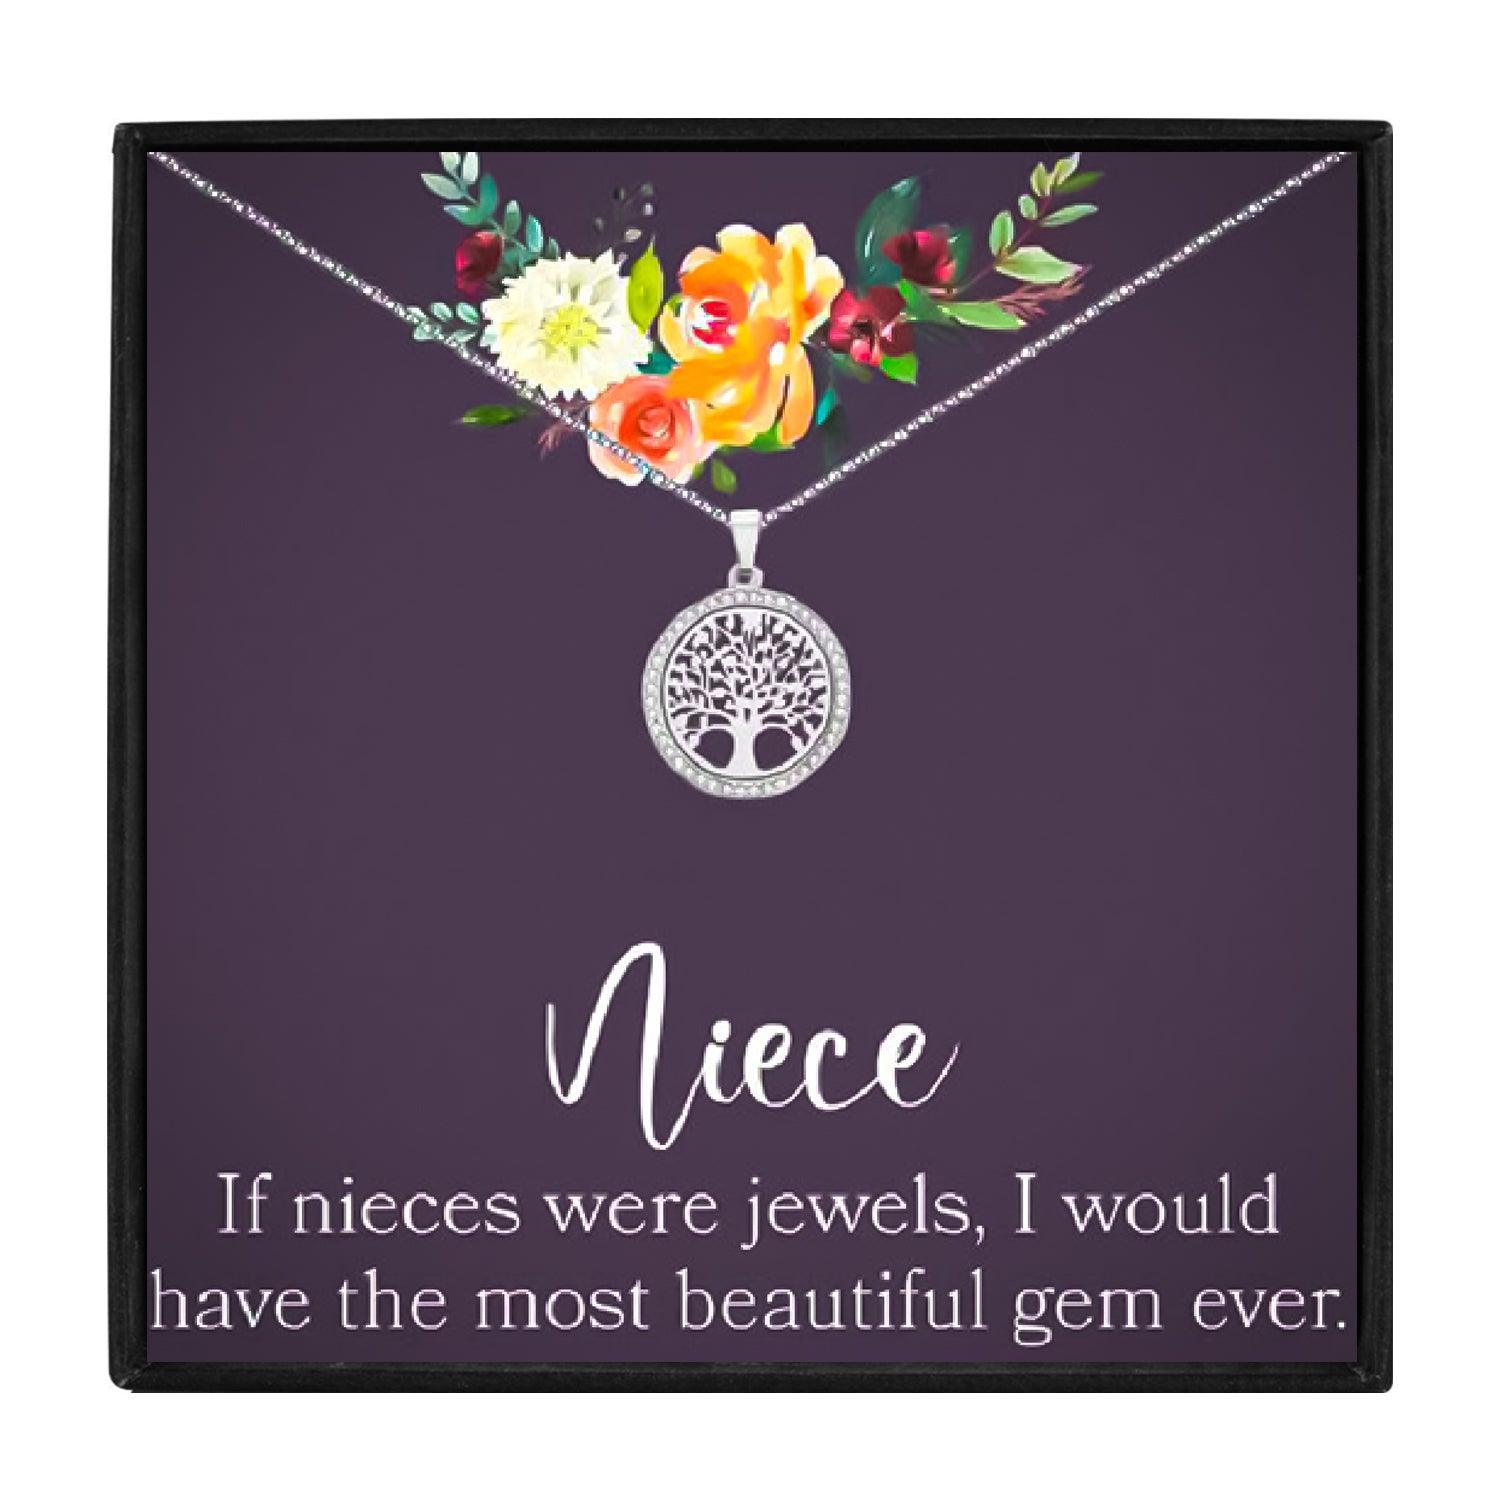 Tree of Life Necklace For My Niece for Christmas 2023 | Tree of Life Necklace For My Niece - undefined | aunt and niece gifts, gift ideas, gift ideas for niece, Necklace For My Niece, niece gift, Niece gifts, niece gifts from auntie, Tree of Life Necklace For My Niece | From Hunny Life | hunnylife.com